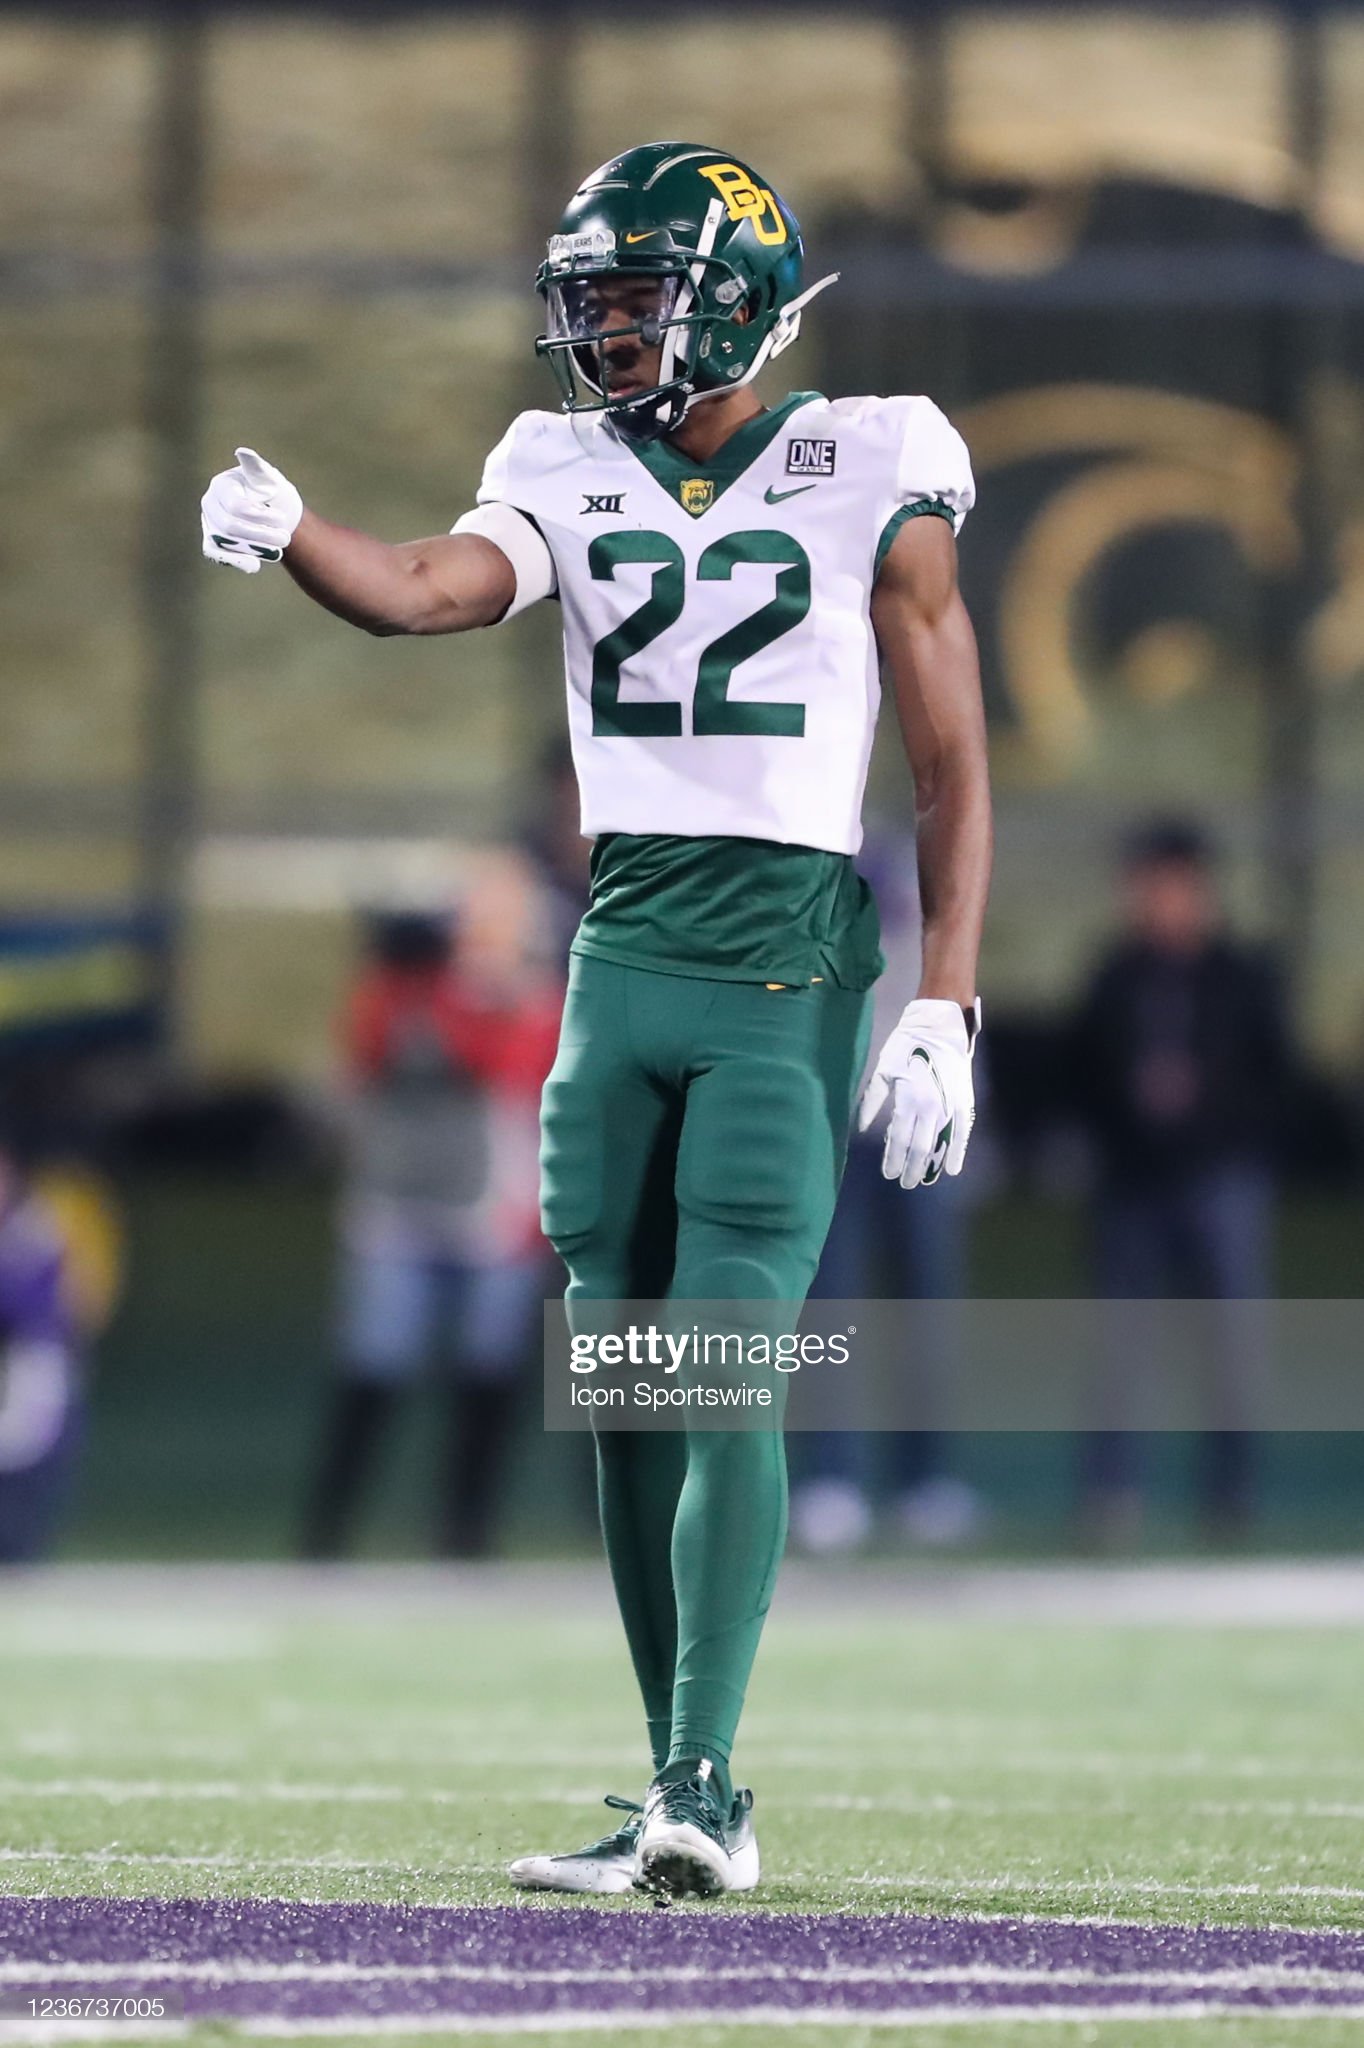 baylor-bears-safety-jt-woods-in-the-second-quarter-of-a-big-12-game-picture-id1236737005